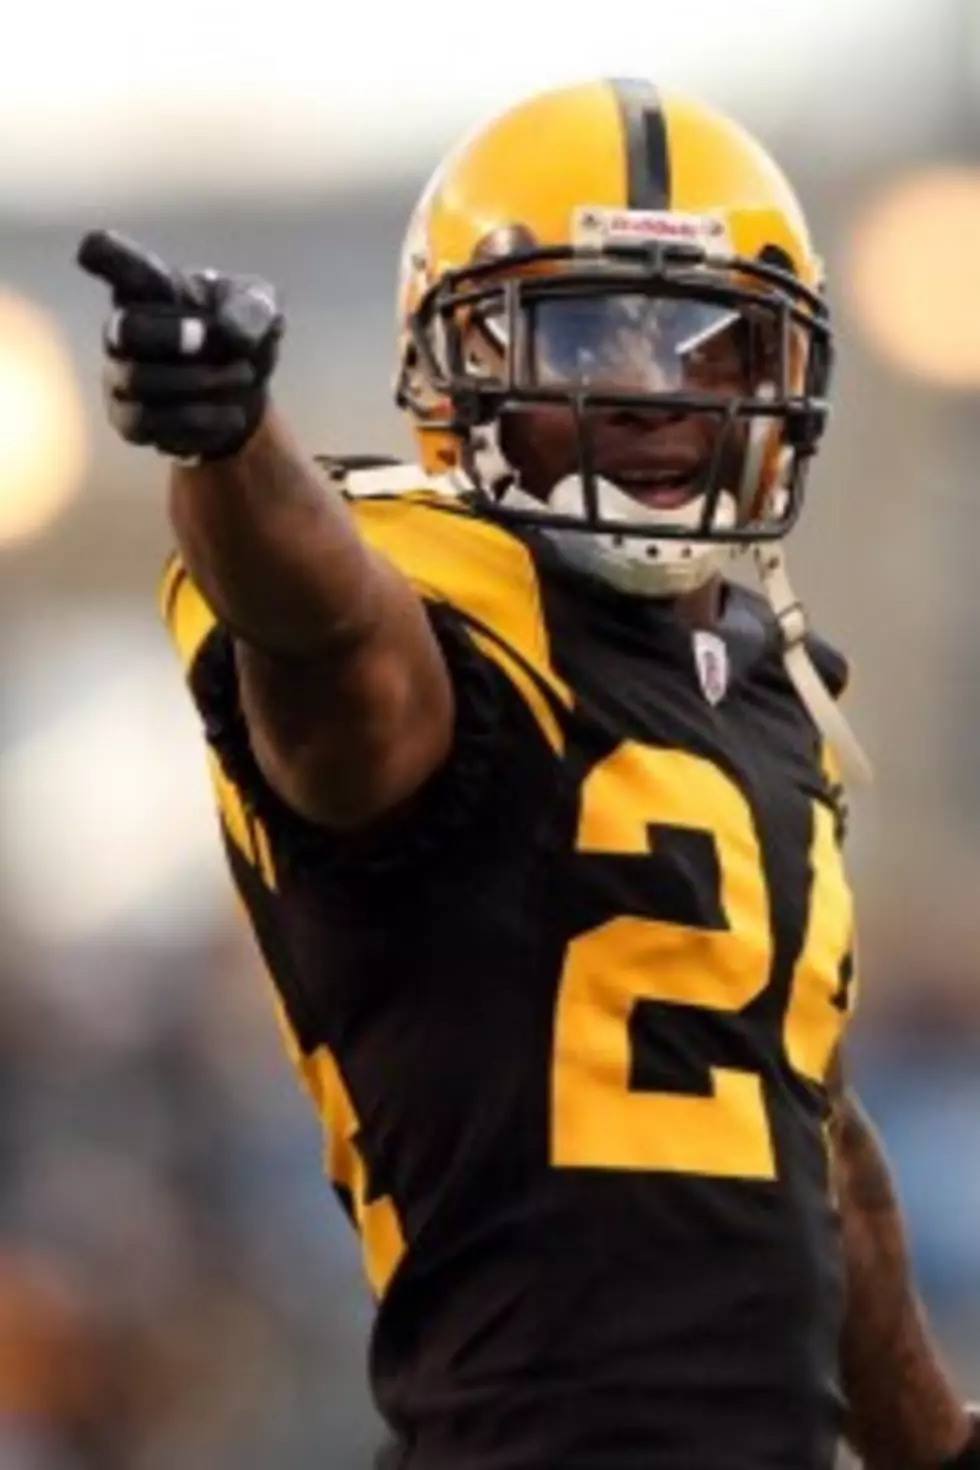 Steelers CB Ike Taylor To Miss Time With Ankle Injury